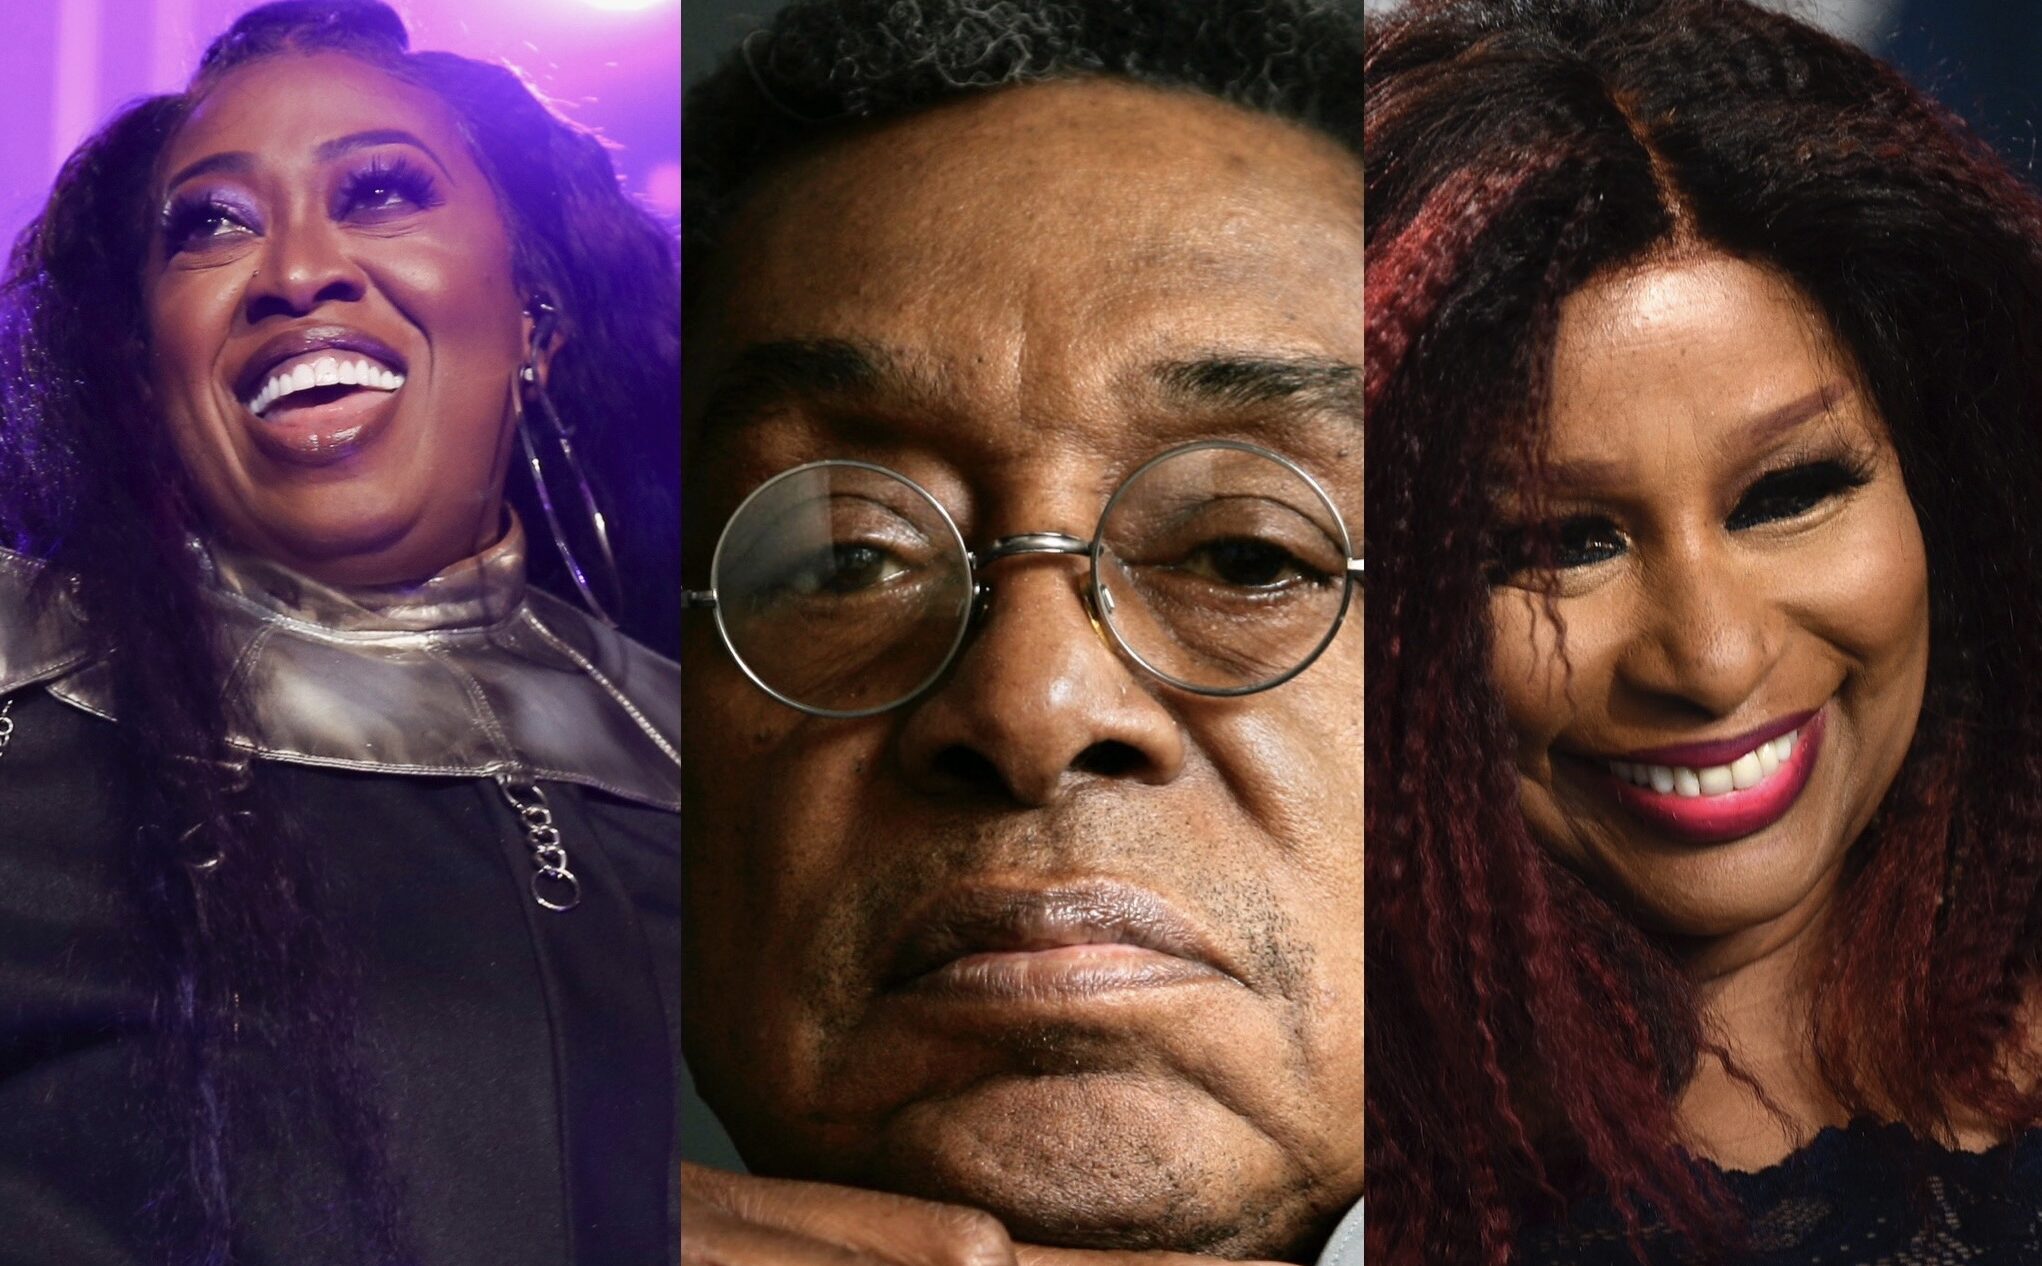 Missy Elliot, the late Don Cornelius and Chaka Khan (left to right) were inducted into the Rock & Roll Hall of Fame Wednesday, May 3, 2023. Photo credit: Donald Trail, Invision/The Associated Press; Damian Dovarganes, The Associated Press; Evan Agostini, Invision/The Associated Press.